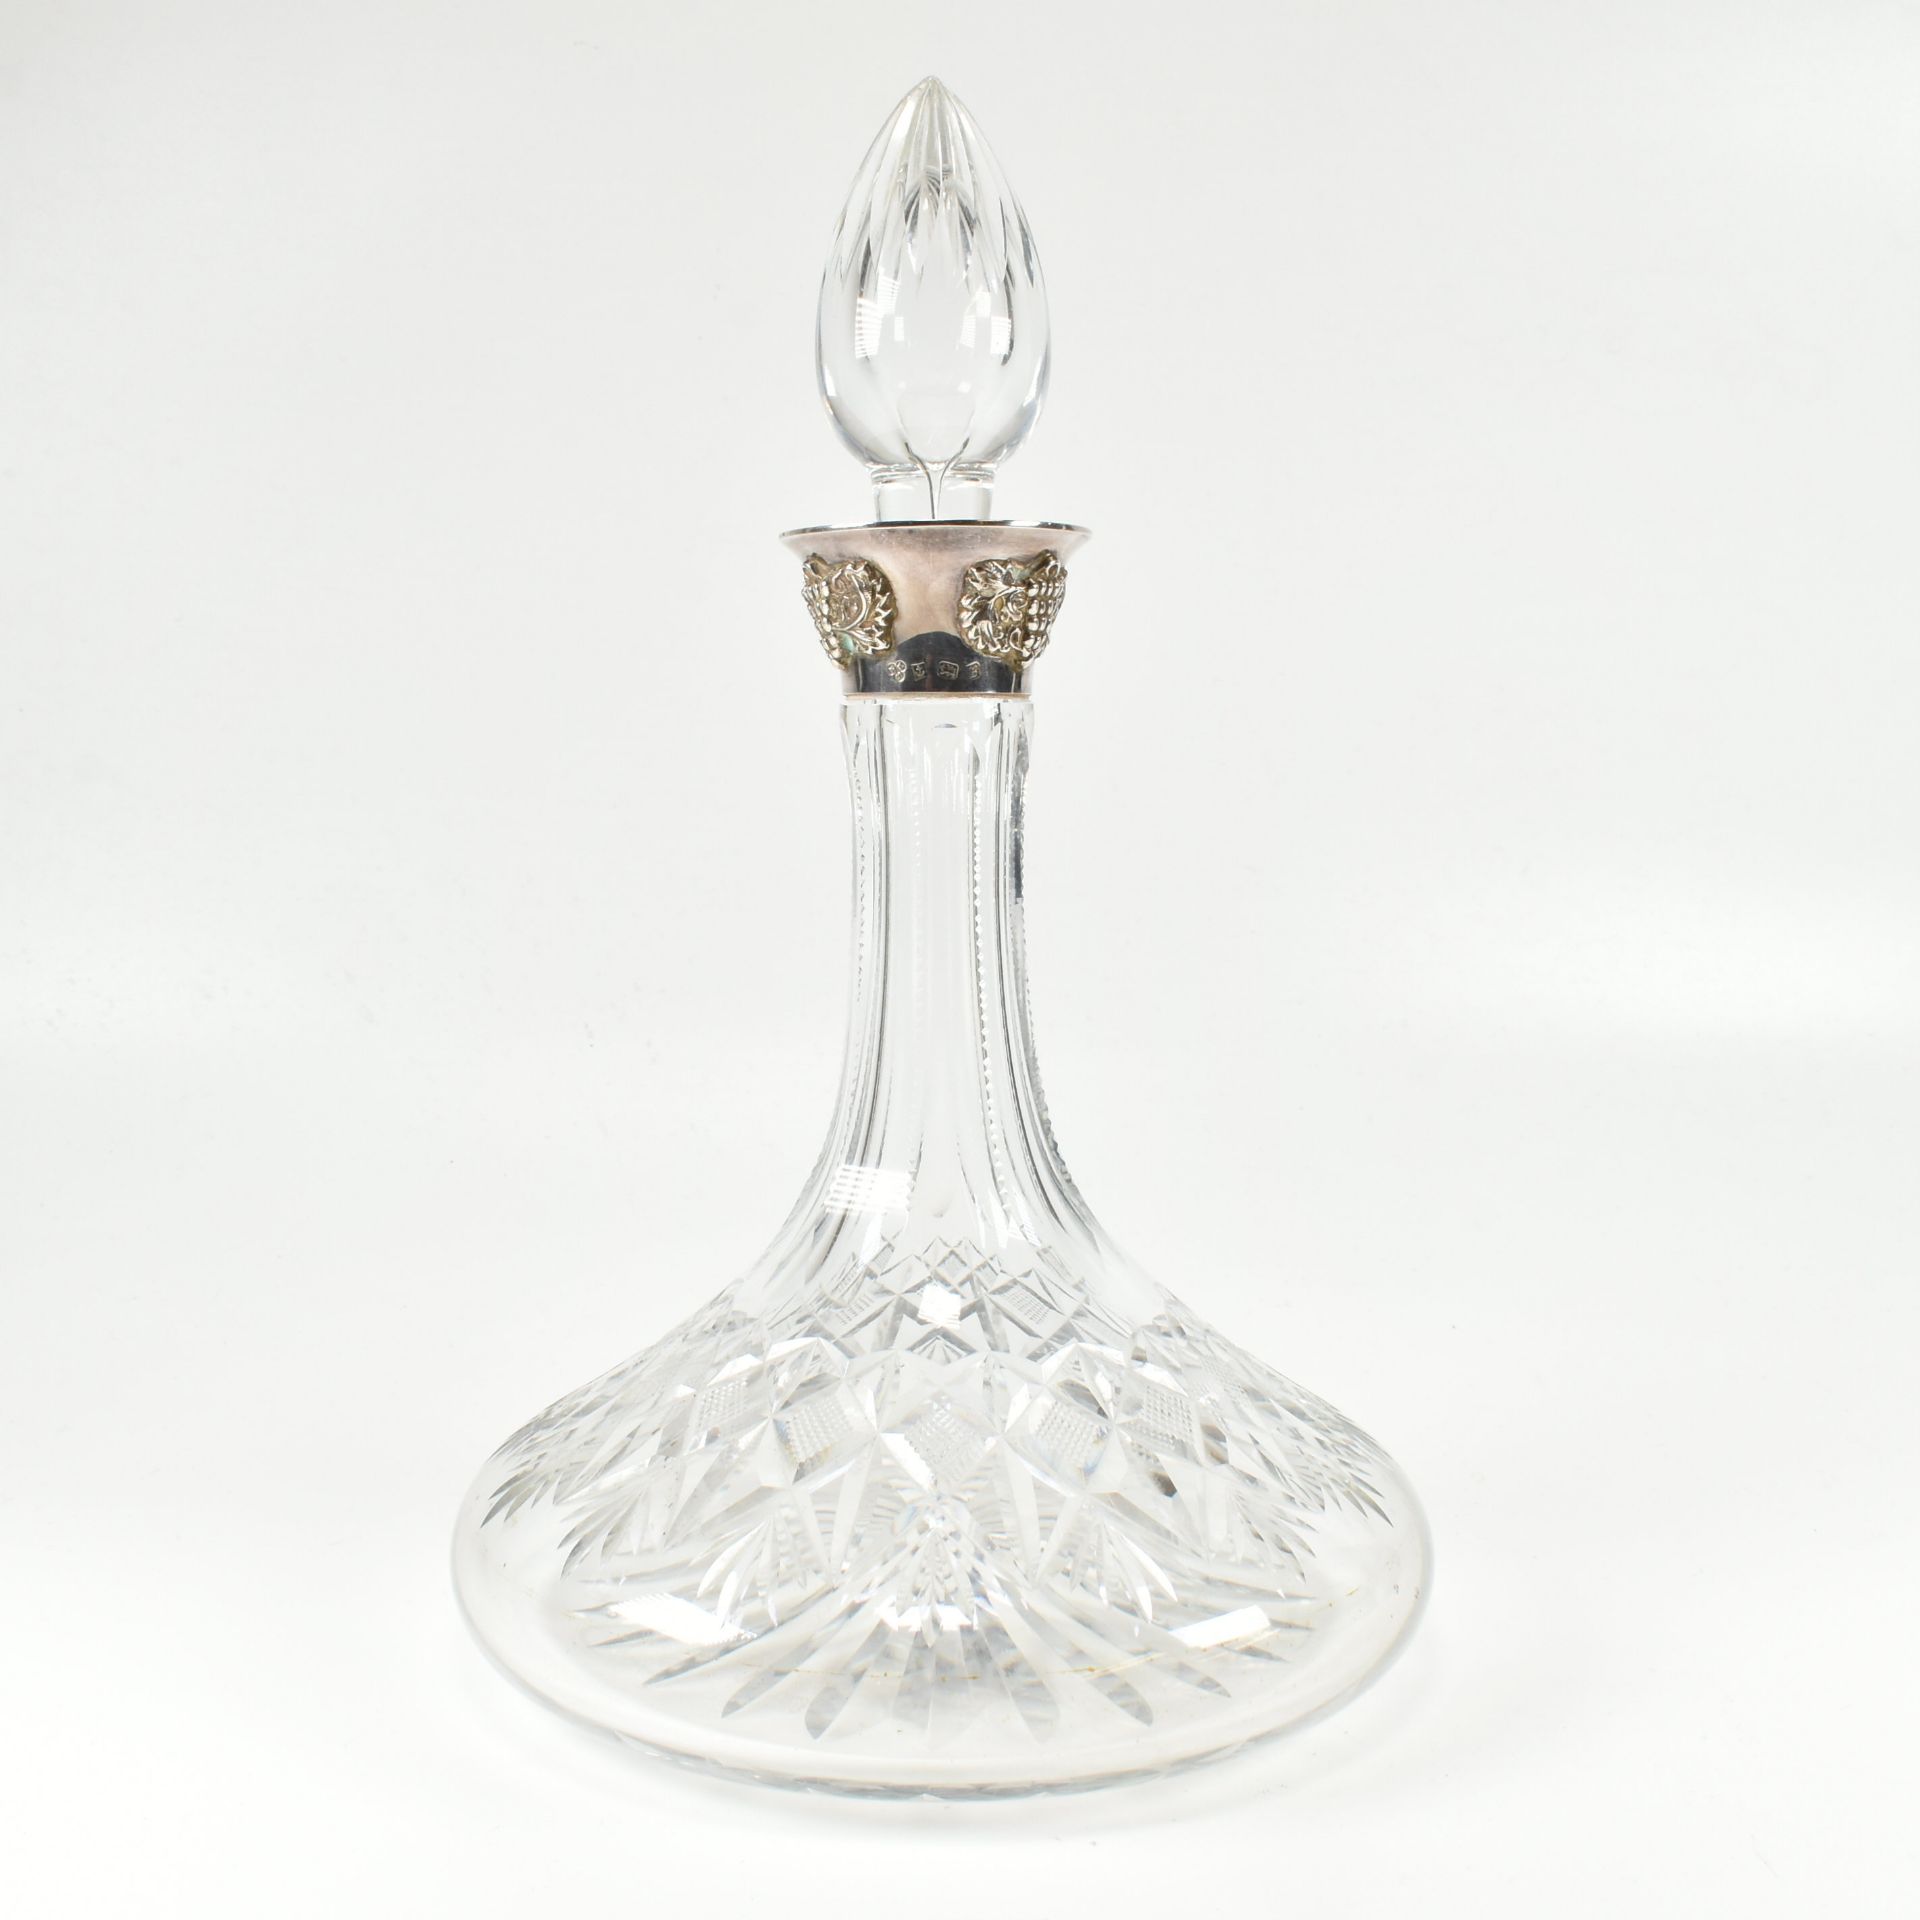 1970S HALLMARKED SILVER MOUNTED CUT GLASS DECANTER - Image 3 of 7